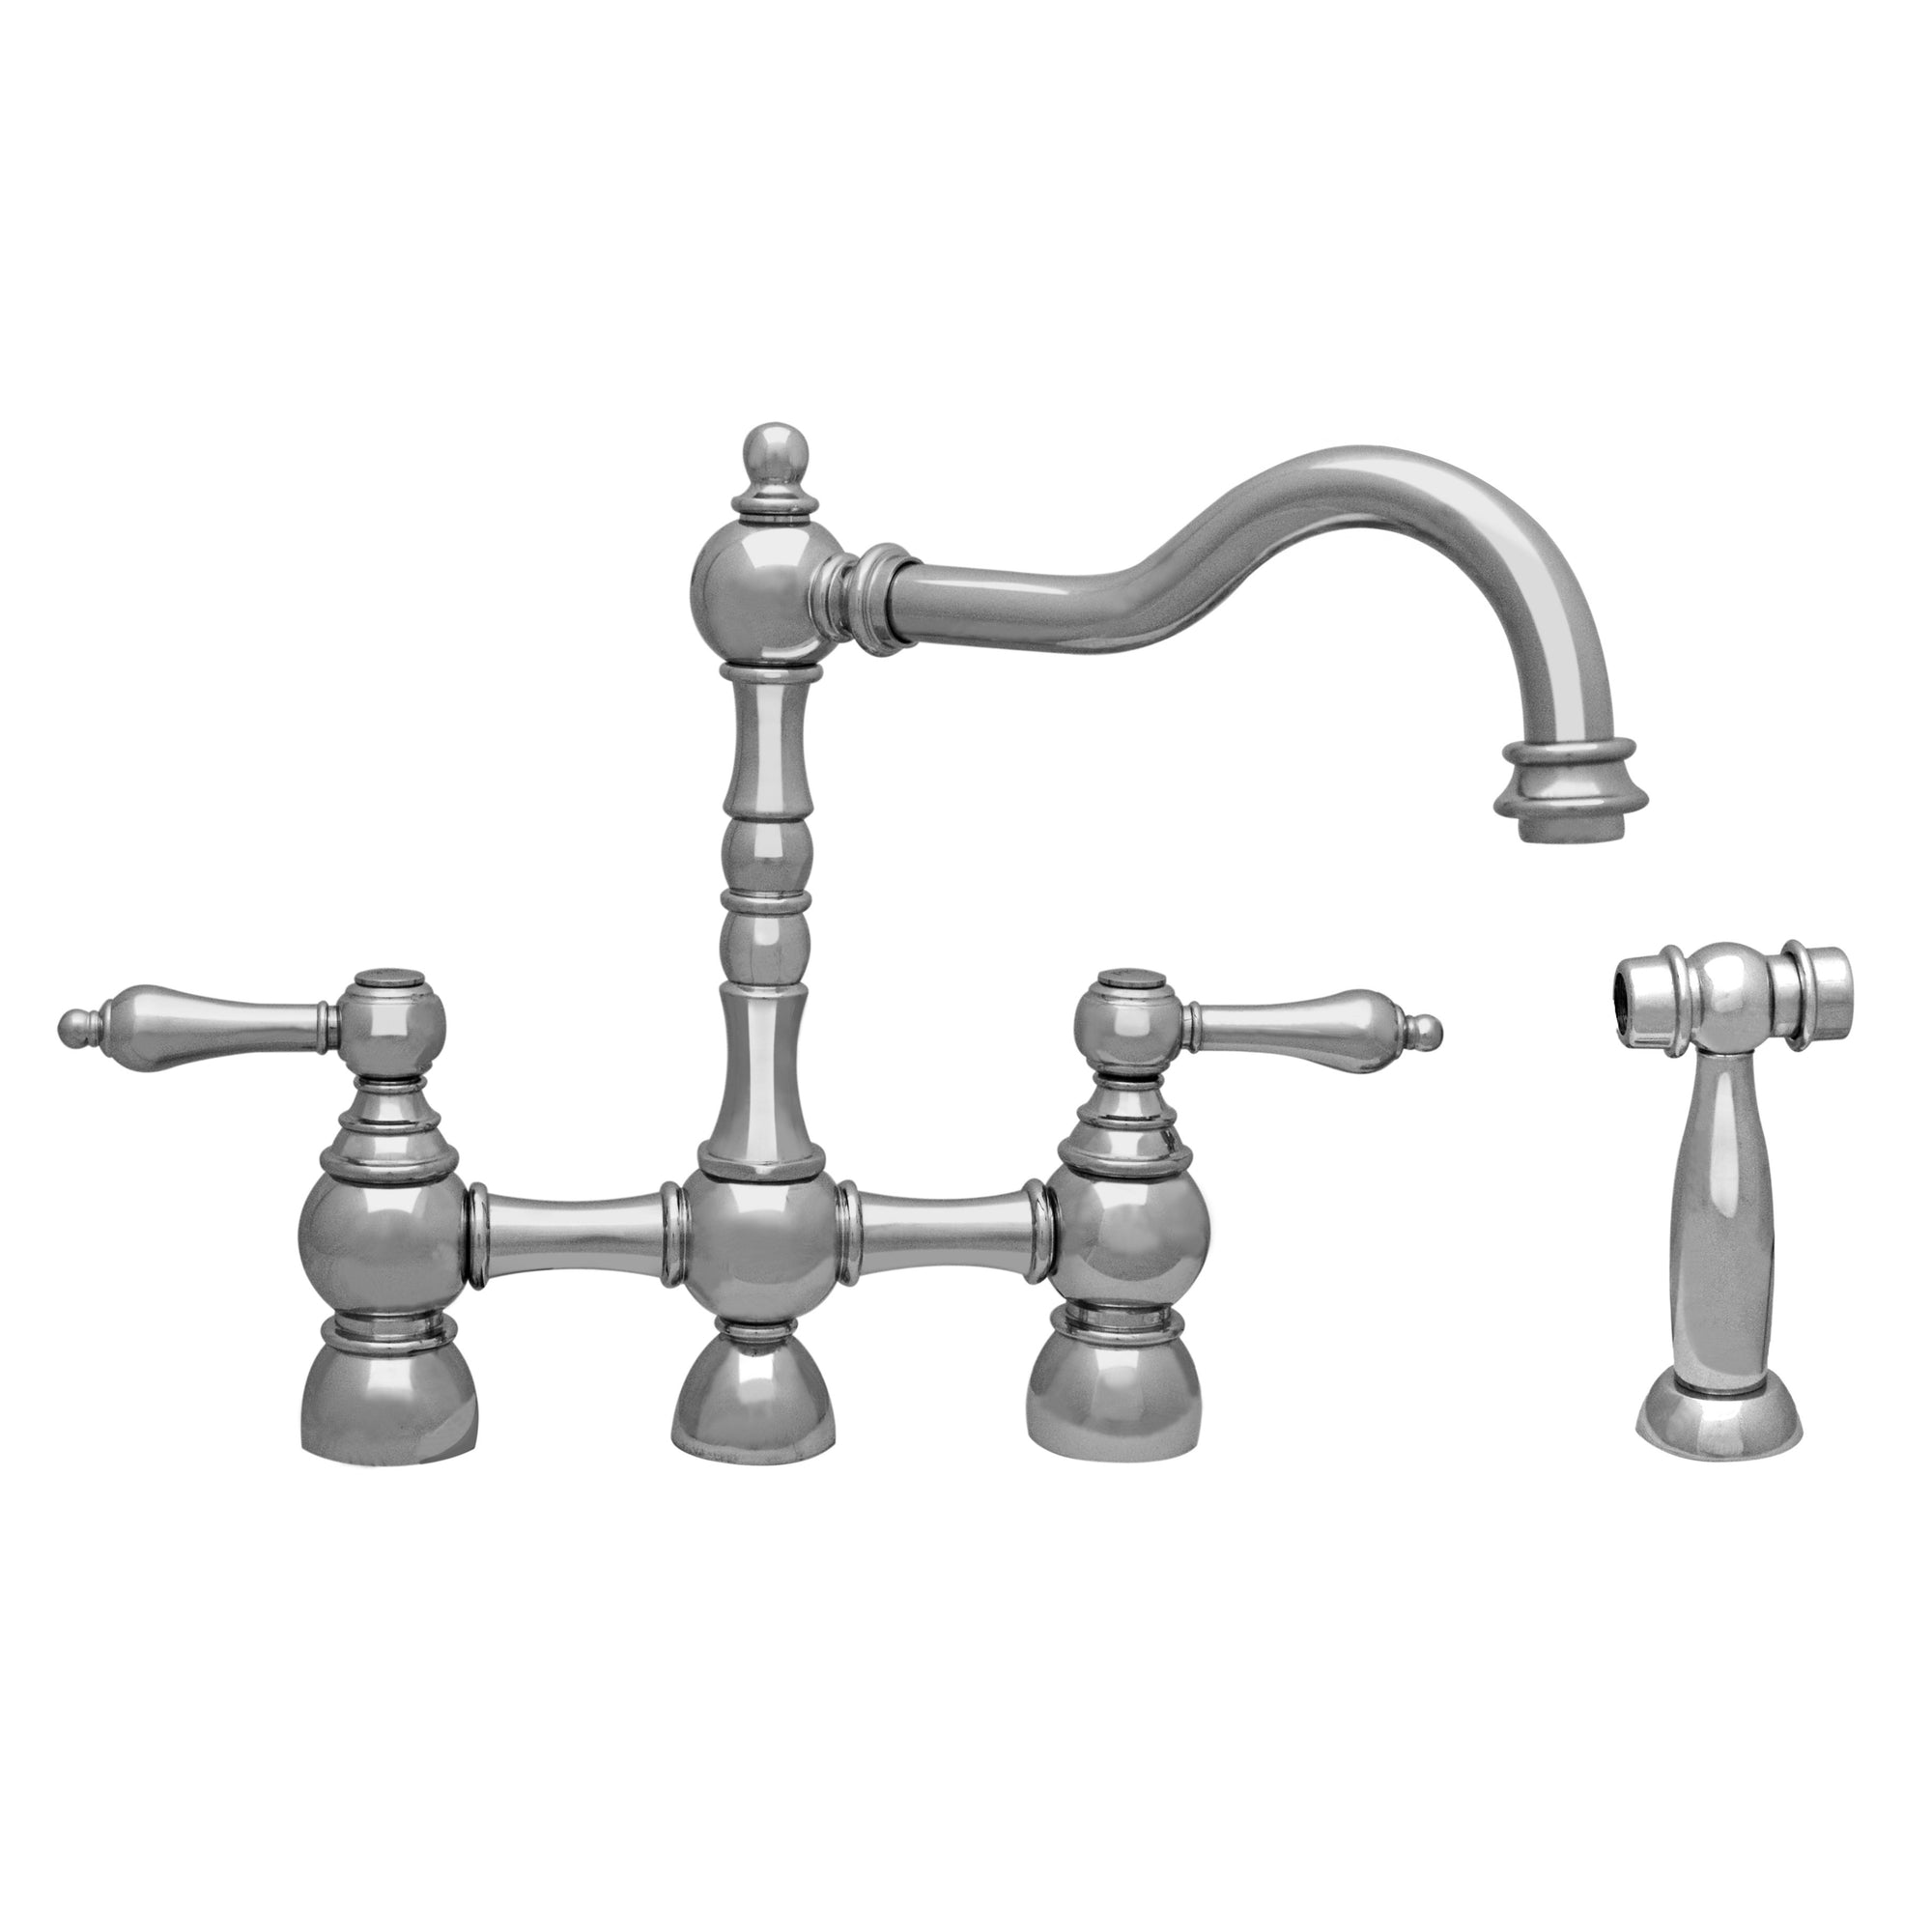 Englishhaus bridge faucet with long traditional swivel spout, solid lever handles and solid brass side spray